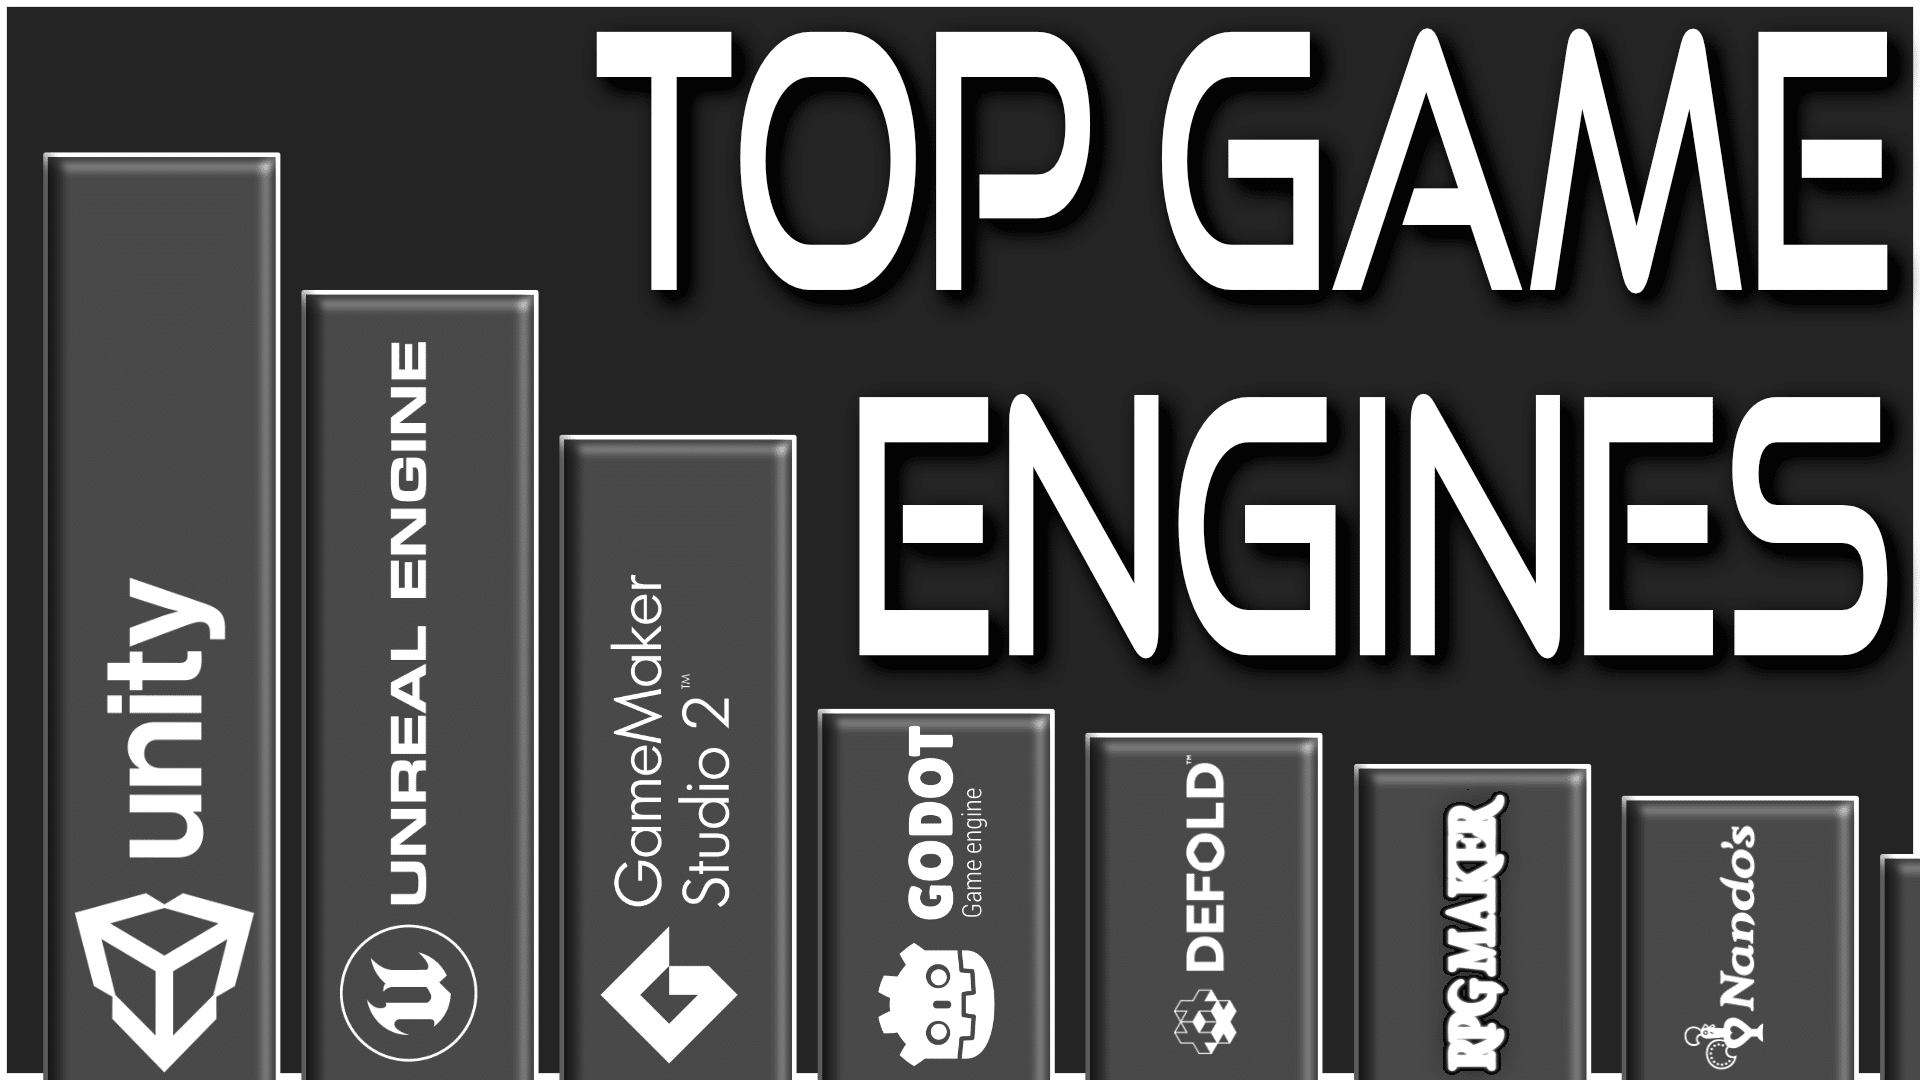 Top Game Engines on Steam